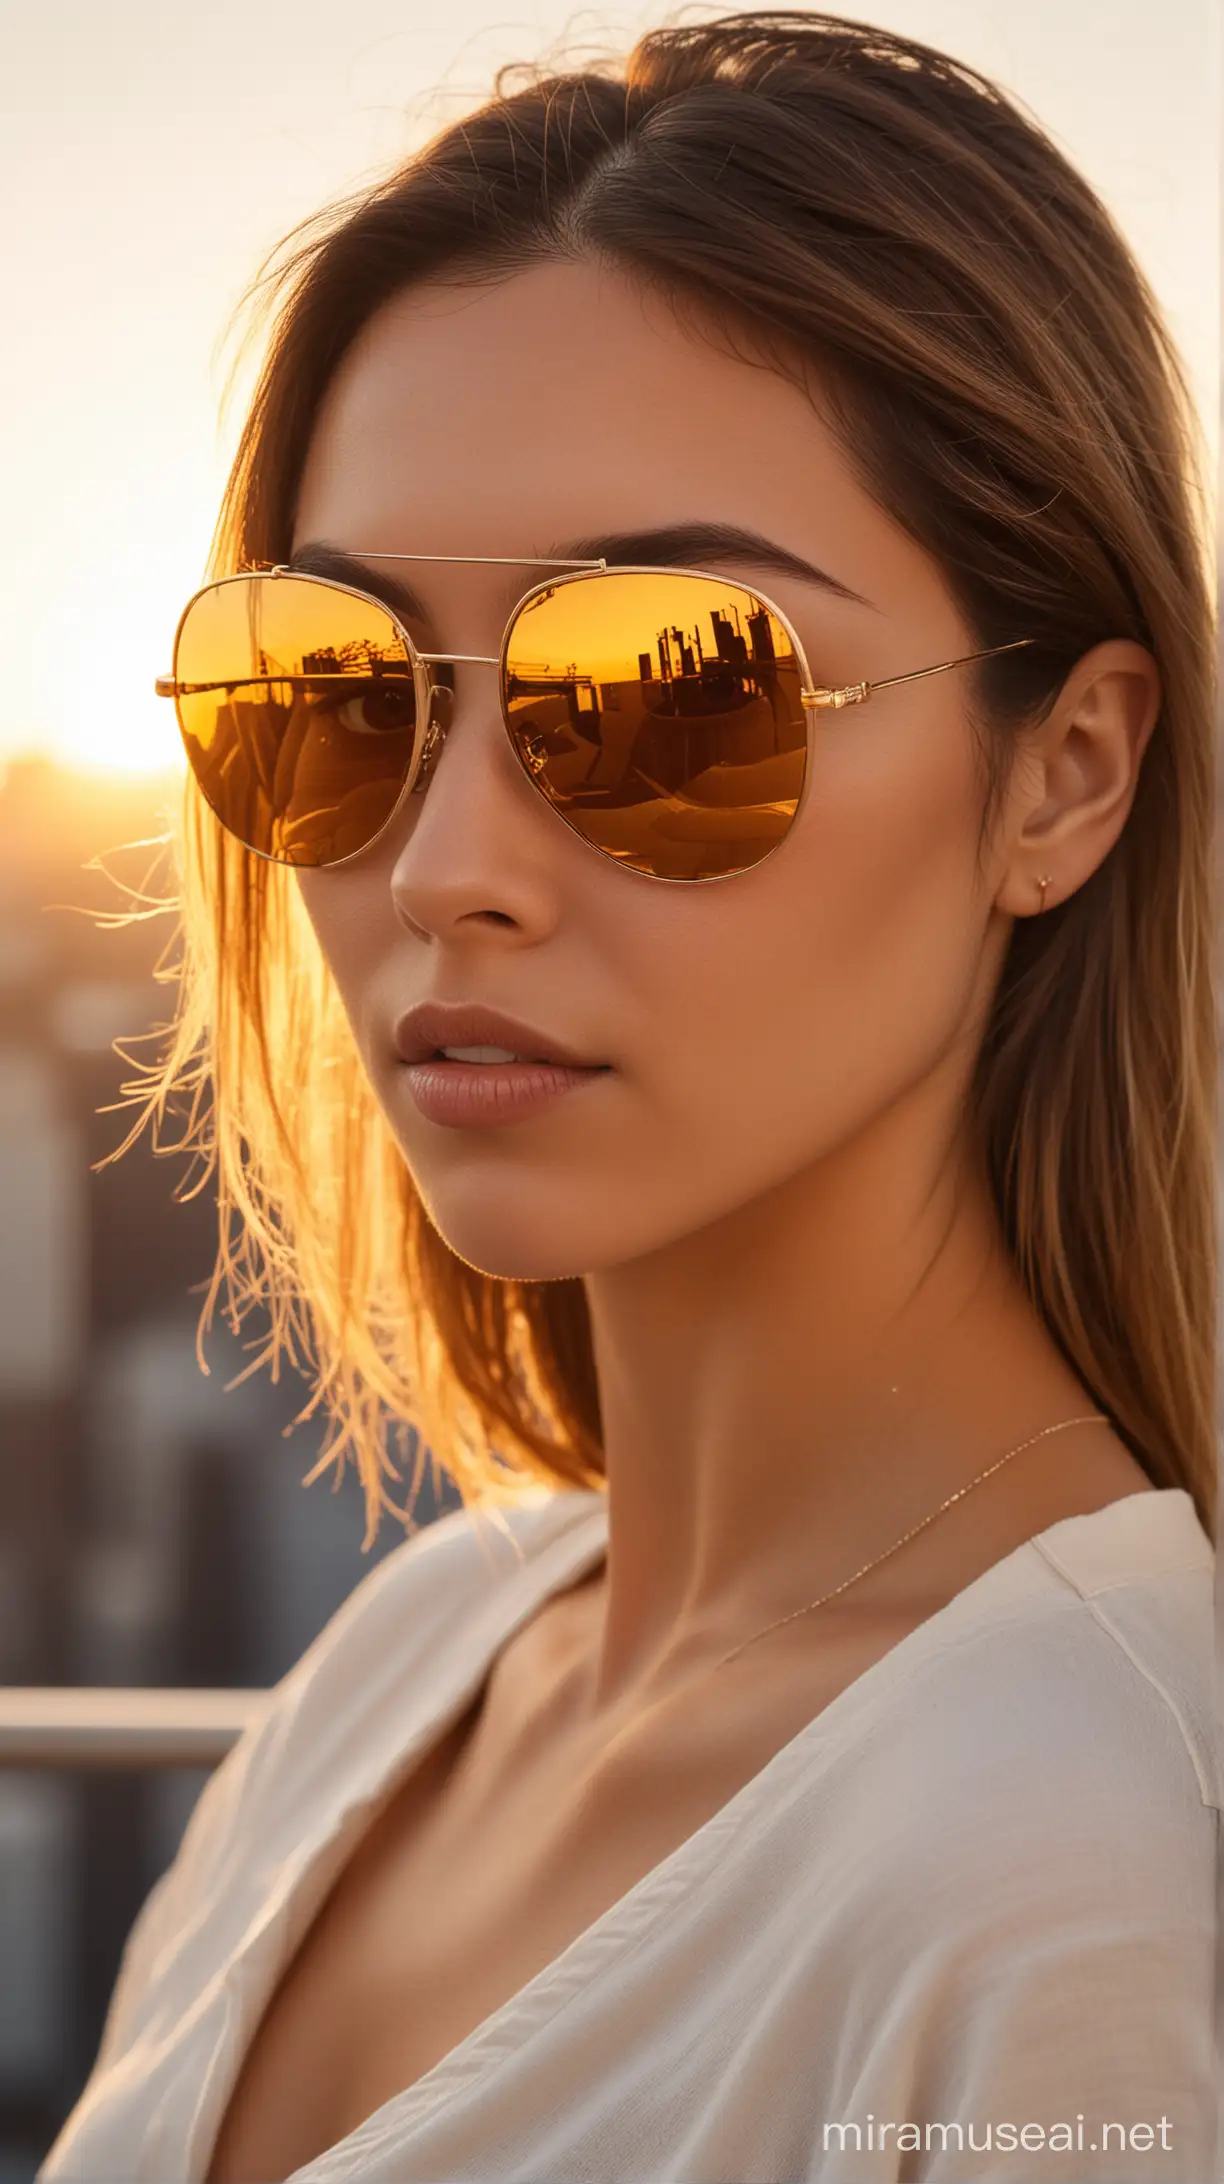 Chic Womens Sunglasses on Urban Rooftop at Sultry Golden Hour Evening